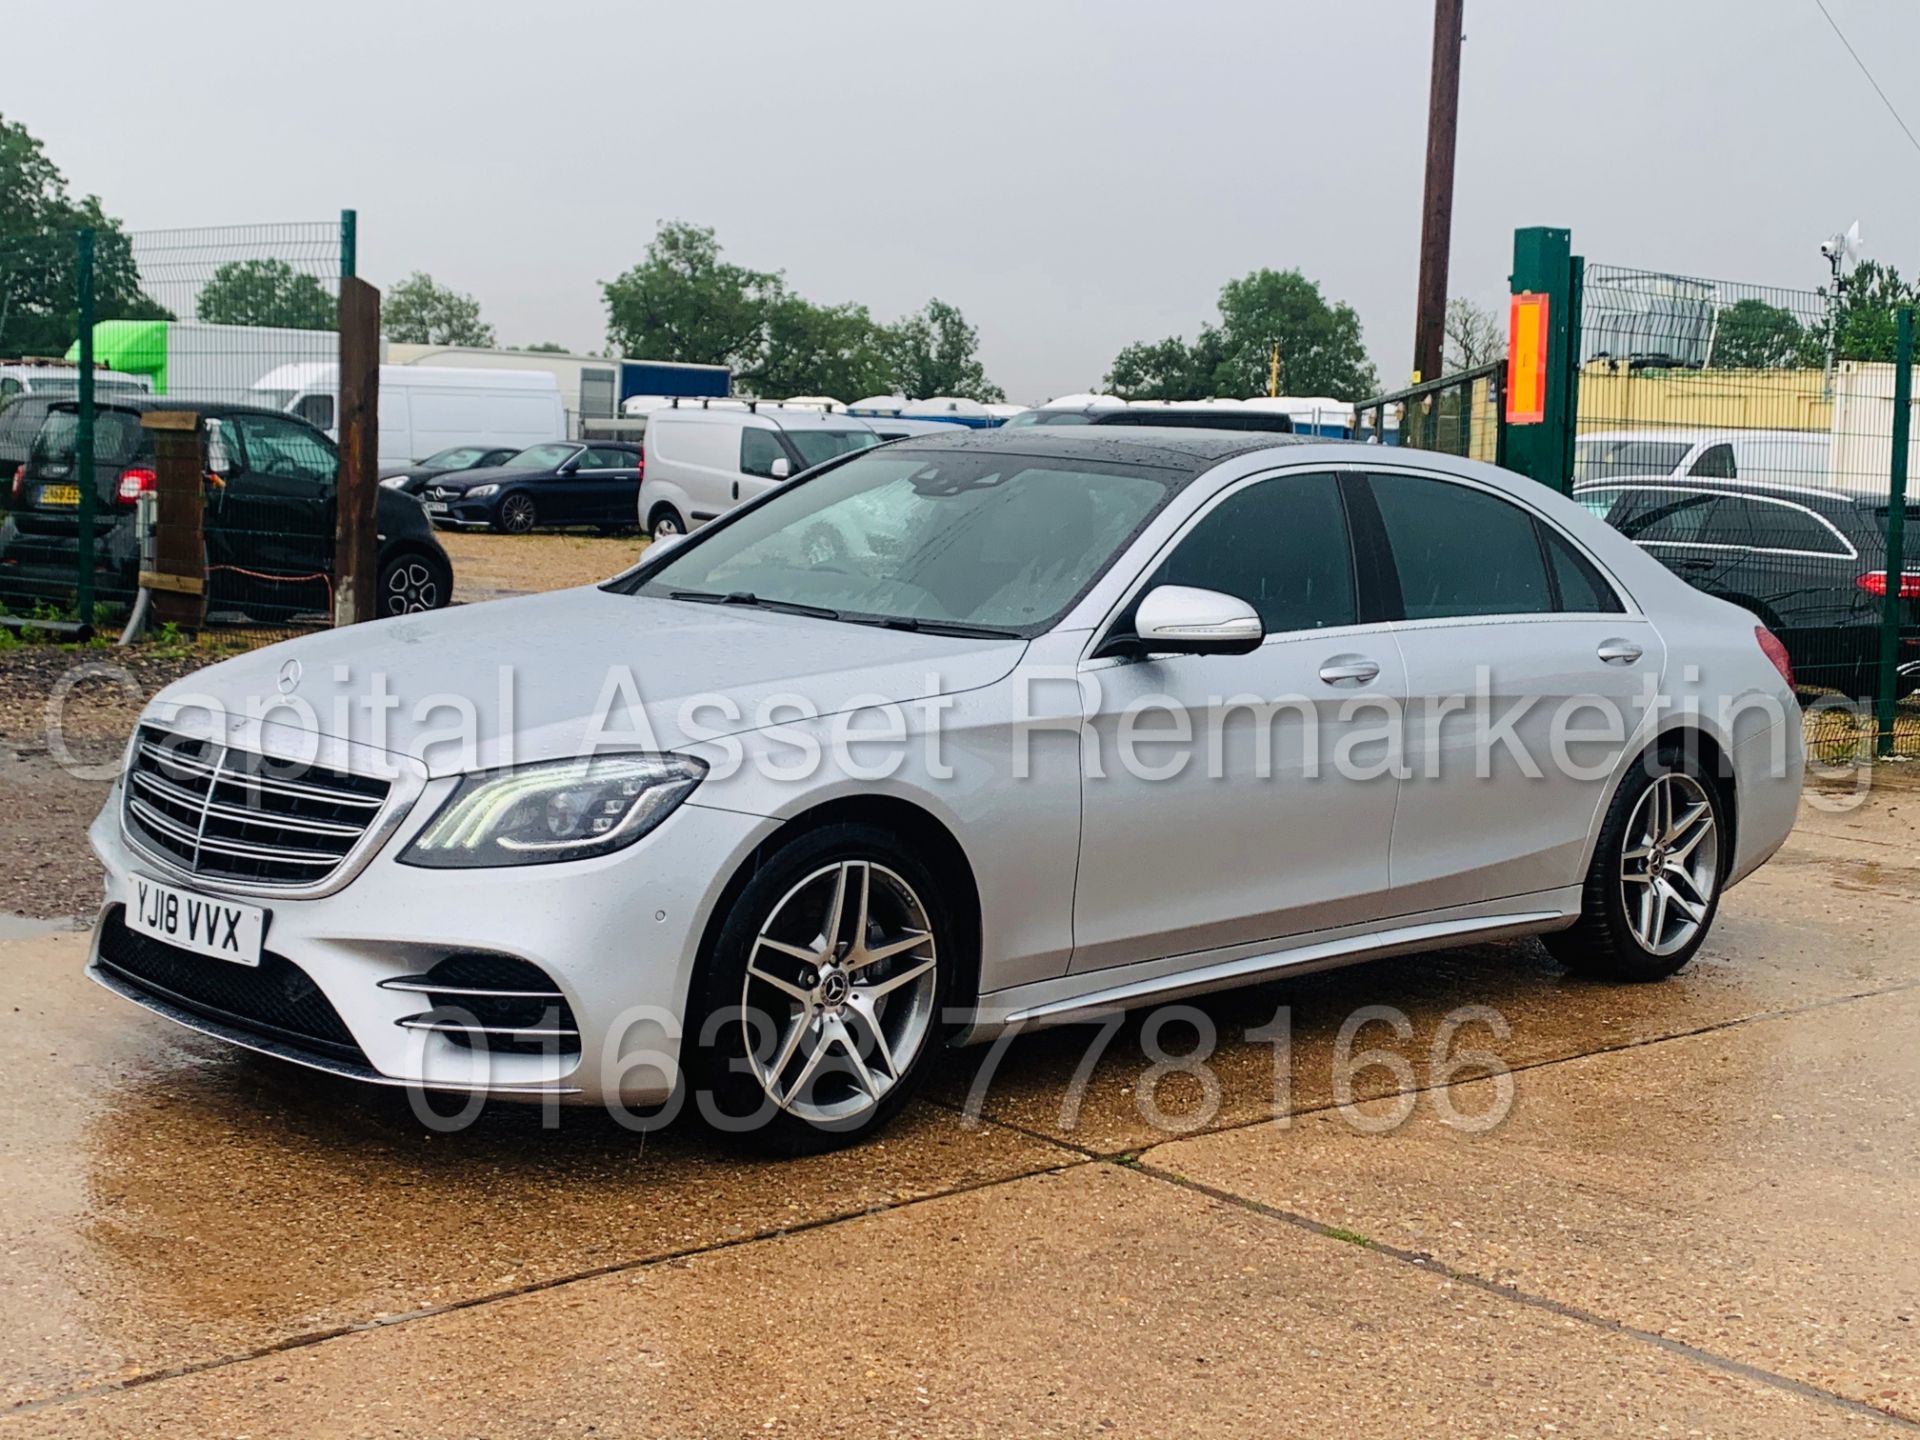 MERCEDES-BENZ S350D LWB *AMG LINE - EXECUTIVE PREMIUM SALOON* (2018) 9-G TRONIC *TOP OF THE RANGE* - Image 7 of 71